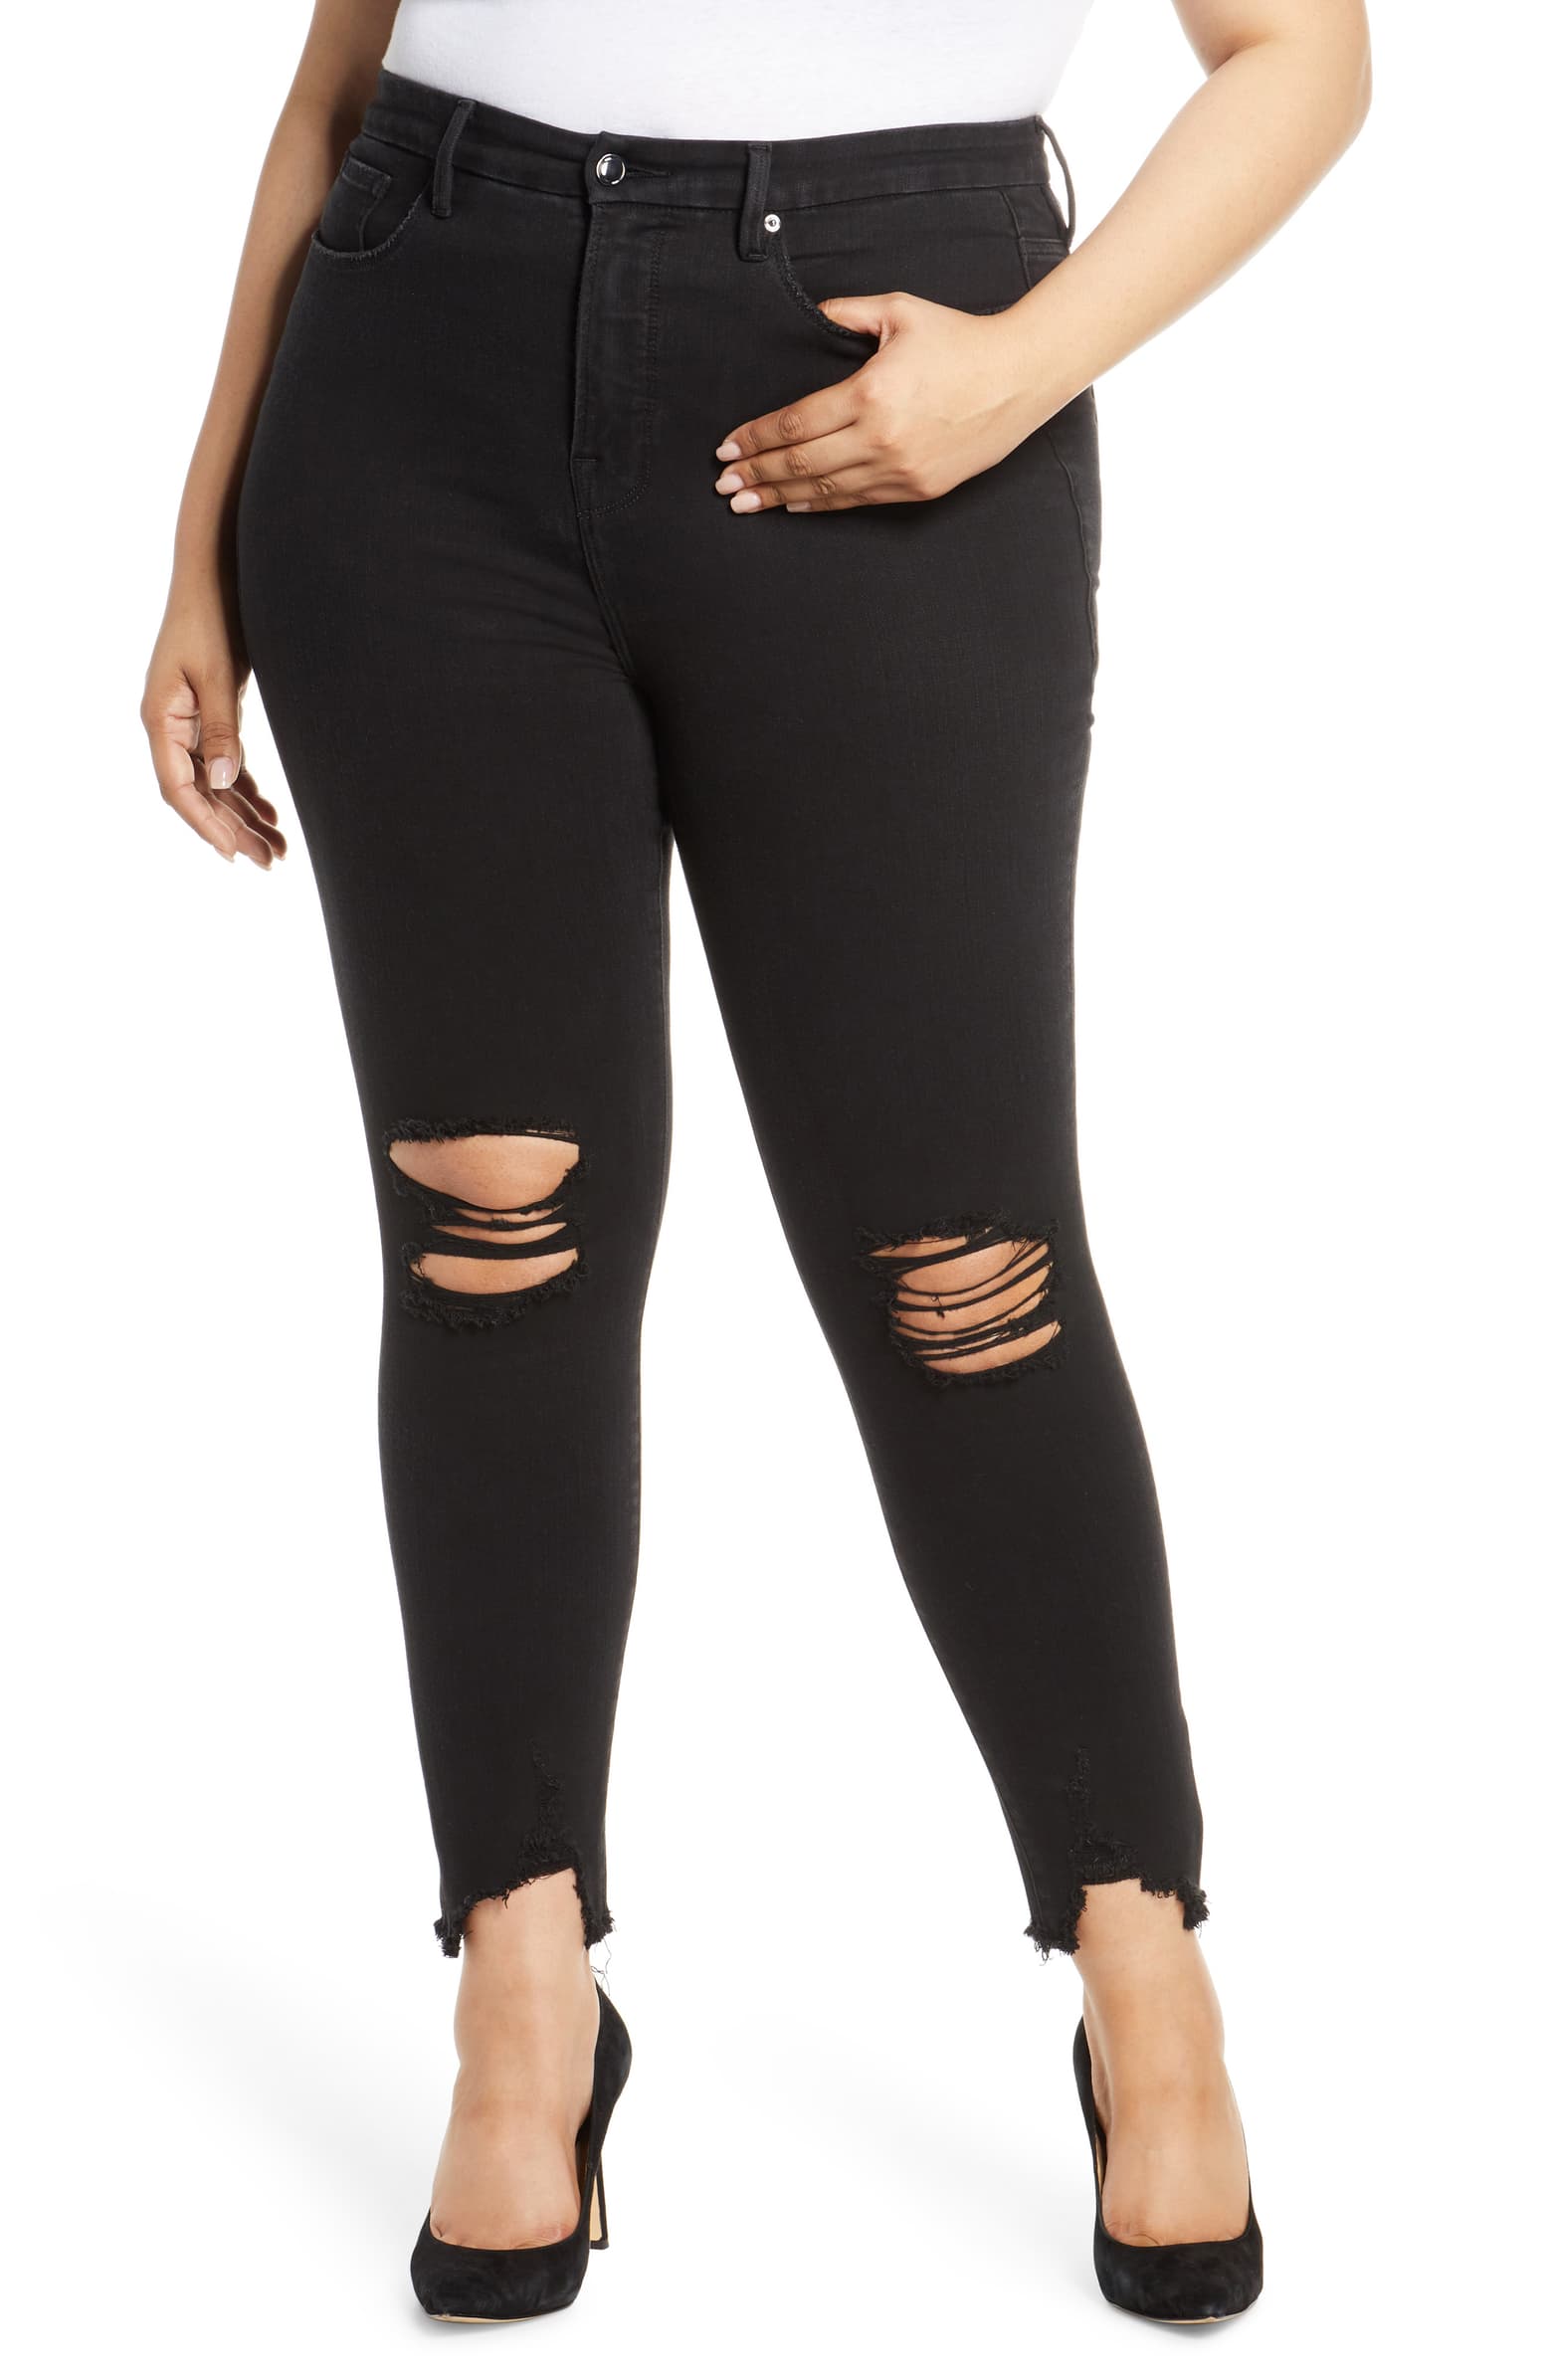 5 Curvy Girl Denim Essentials To Grab From Nordstrom’s Anniversary Sale